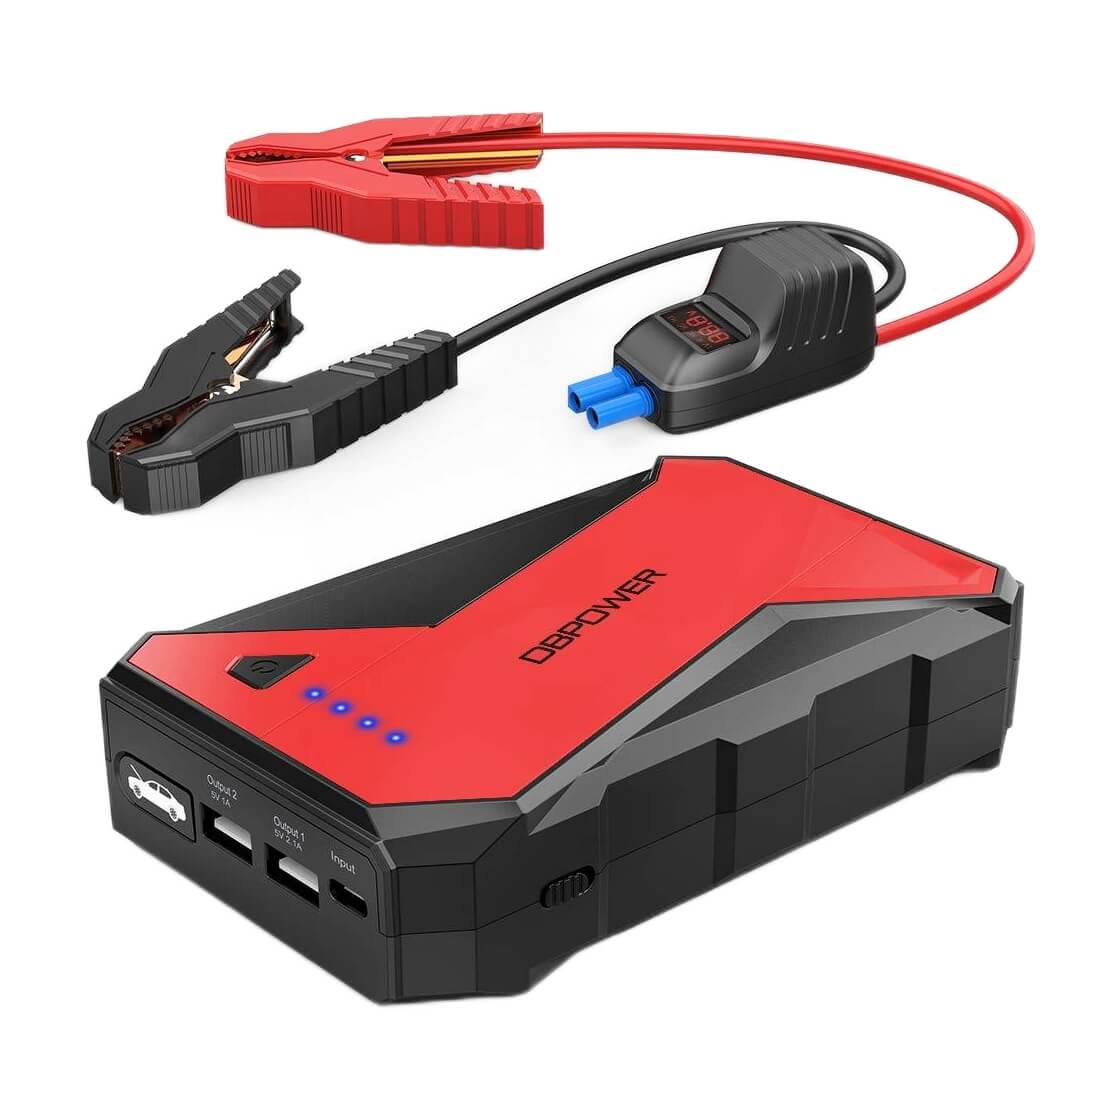 Getit Car Jump Starter, Portable Car Battery Charger Jump Starter, 600a  Peak Auto Jump Box, 12v Power Pack Jumper Start & Phone Charger With Usb  Port